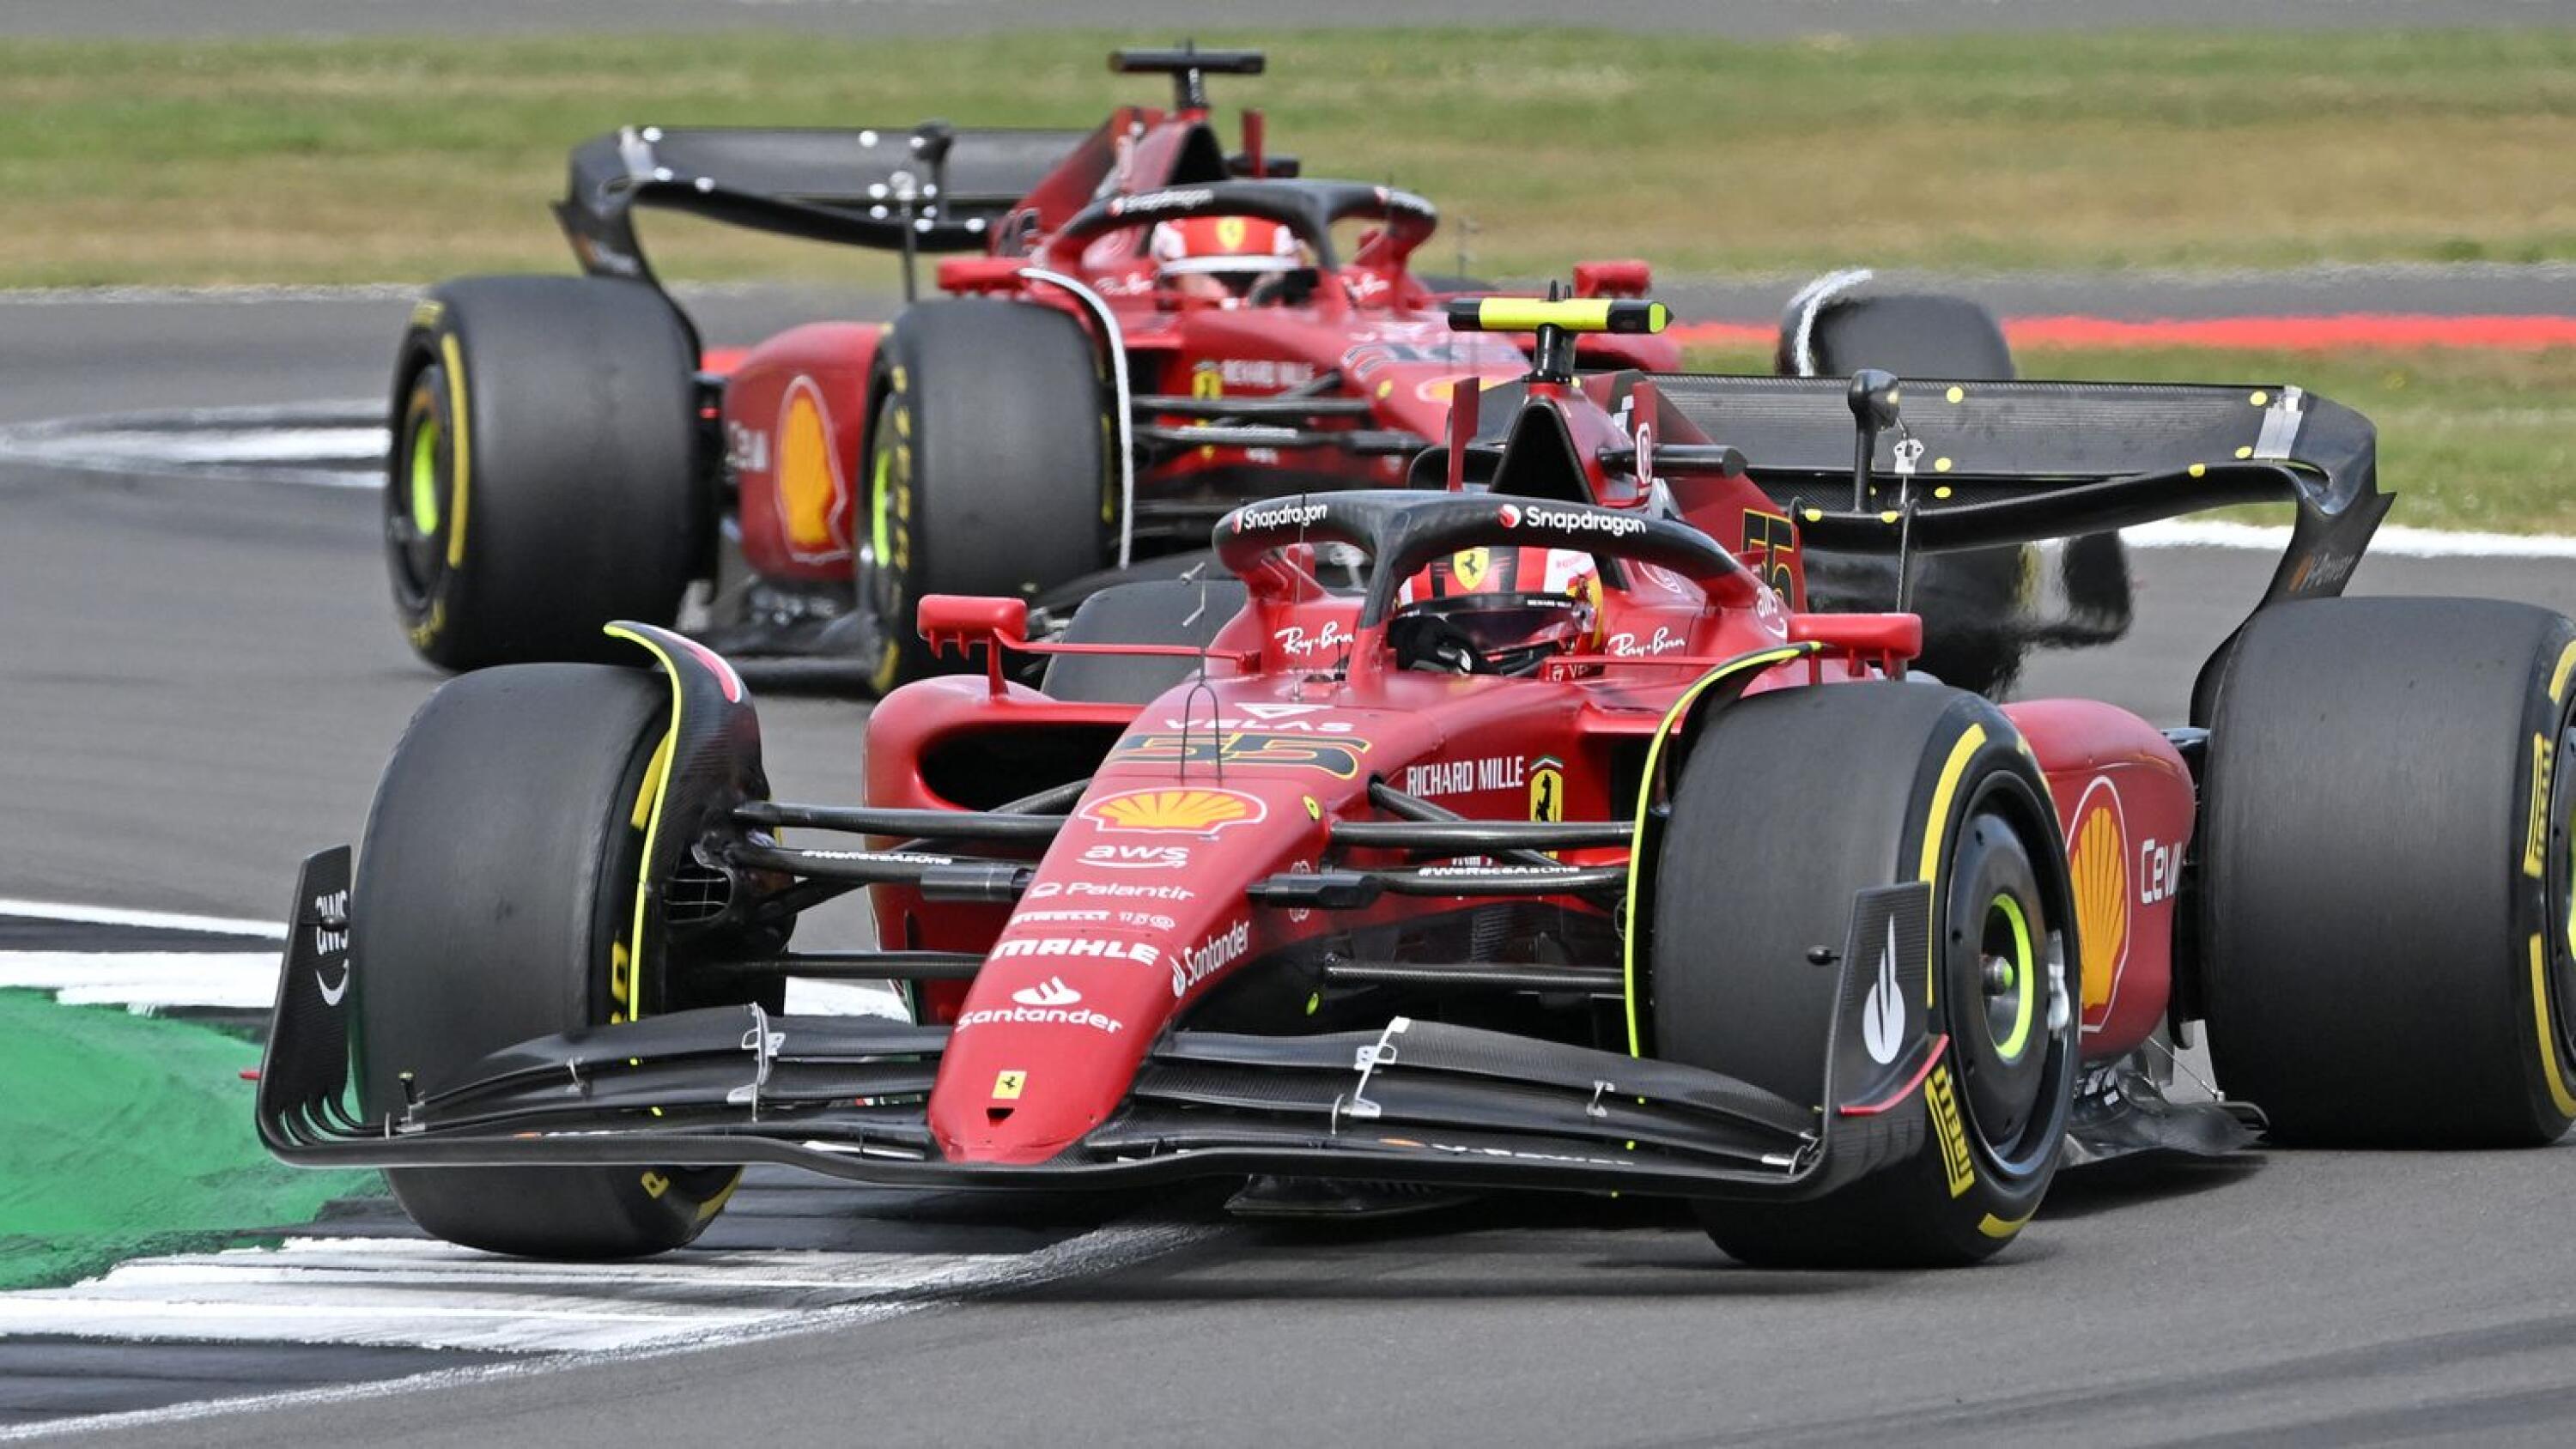 Ferrari's Spanish driver Carlos Sainz Jr (L) leads Ferrari's Monegasque driver Charles Leclerc during the Formula One British Grand Prix at the Silverstone motor racing circuit in Silverstone, central England on Sunday